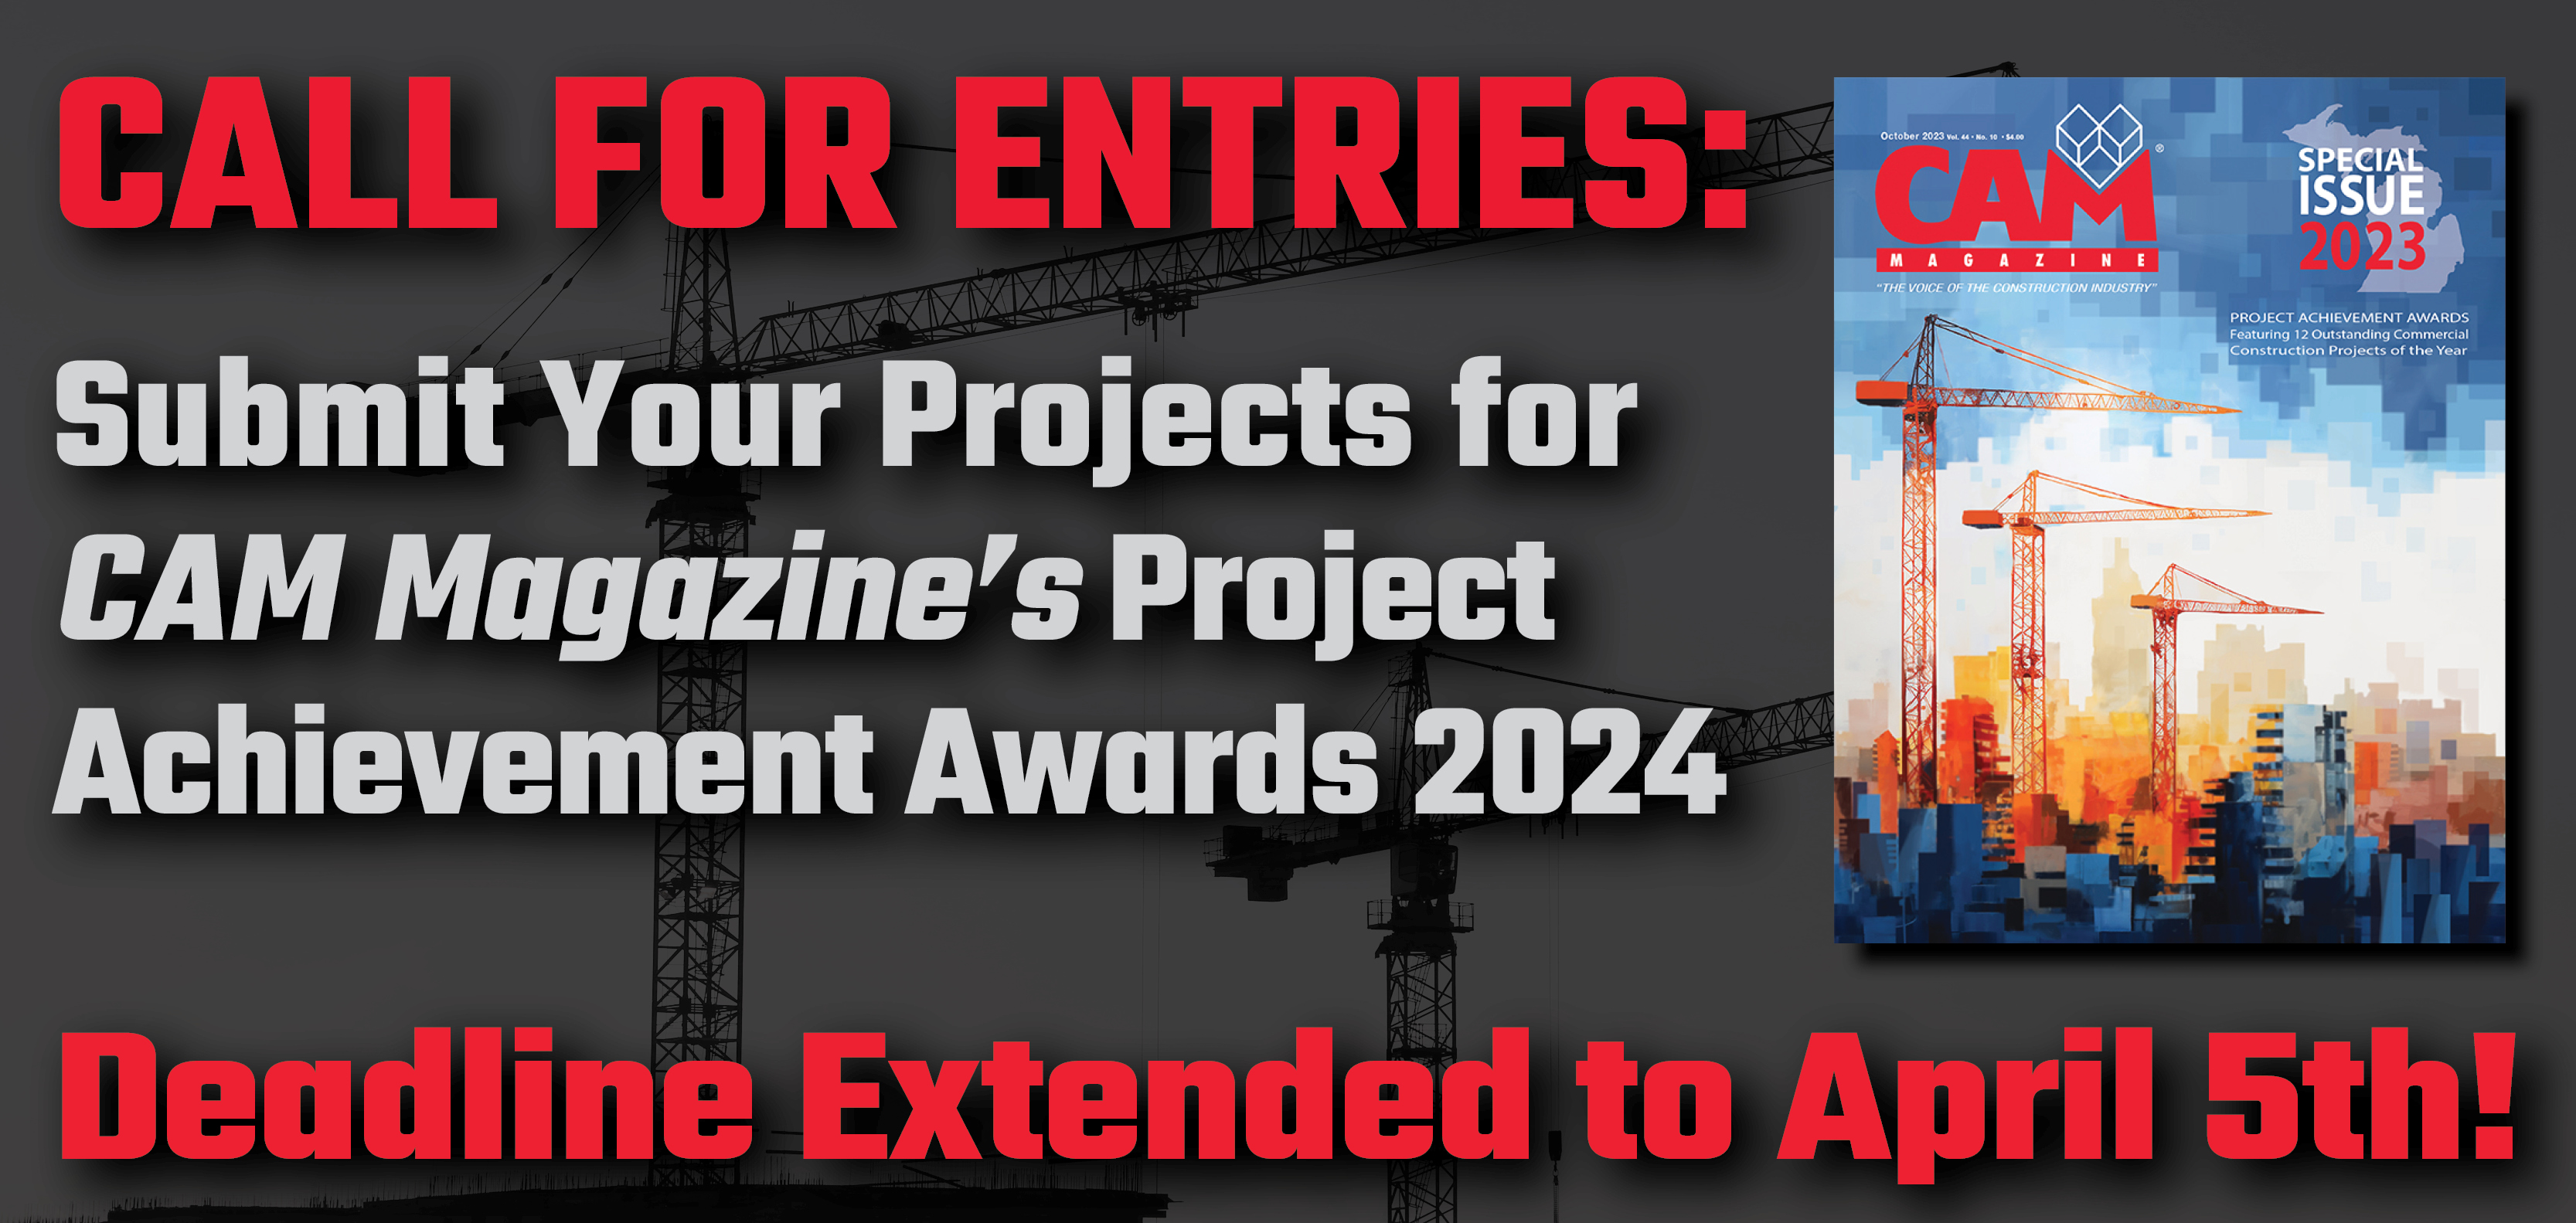 Submit Your Project Achievement Awards Entries by April 5th